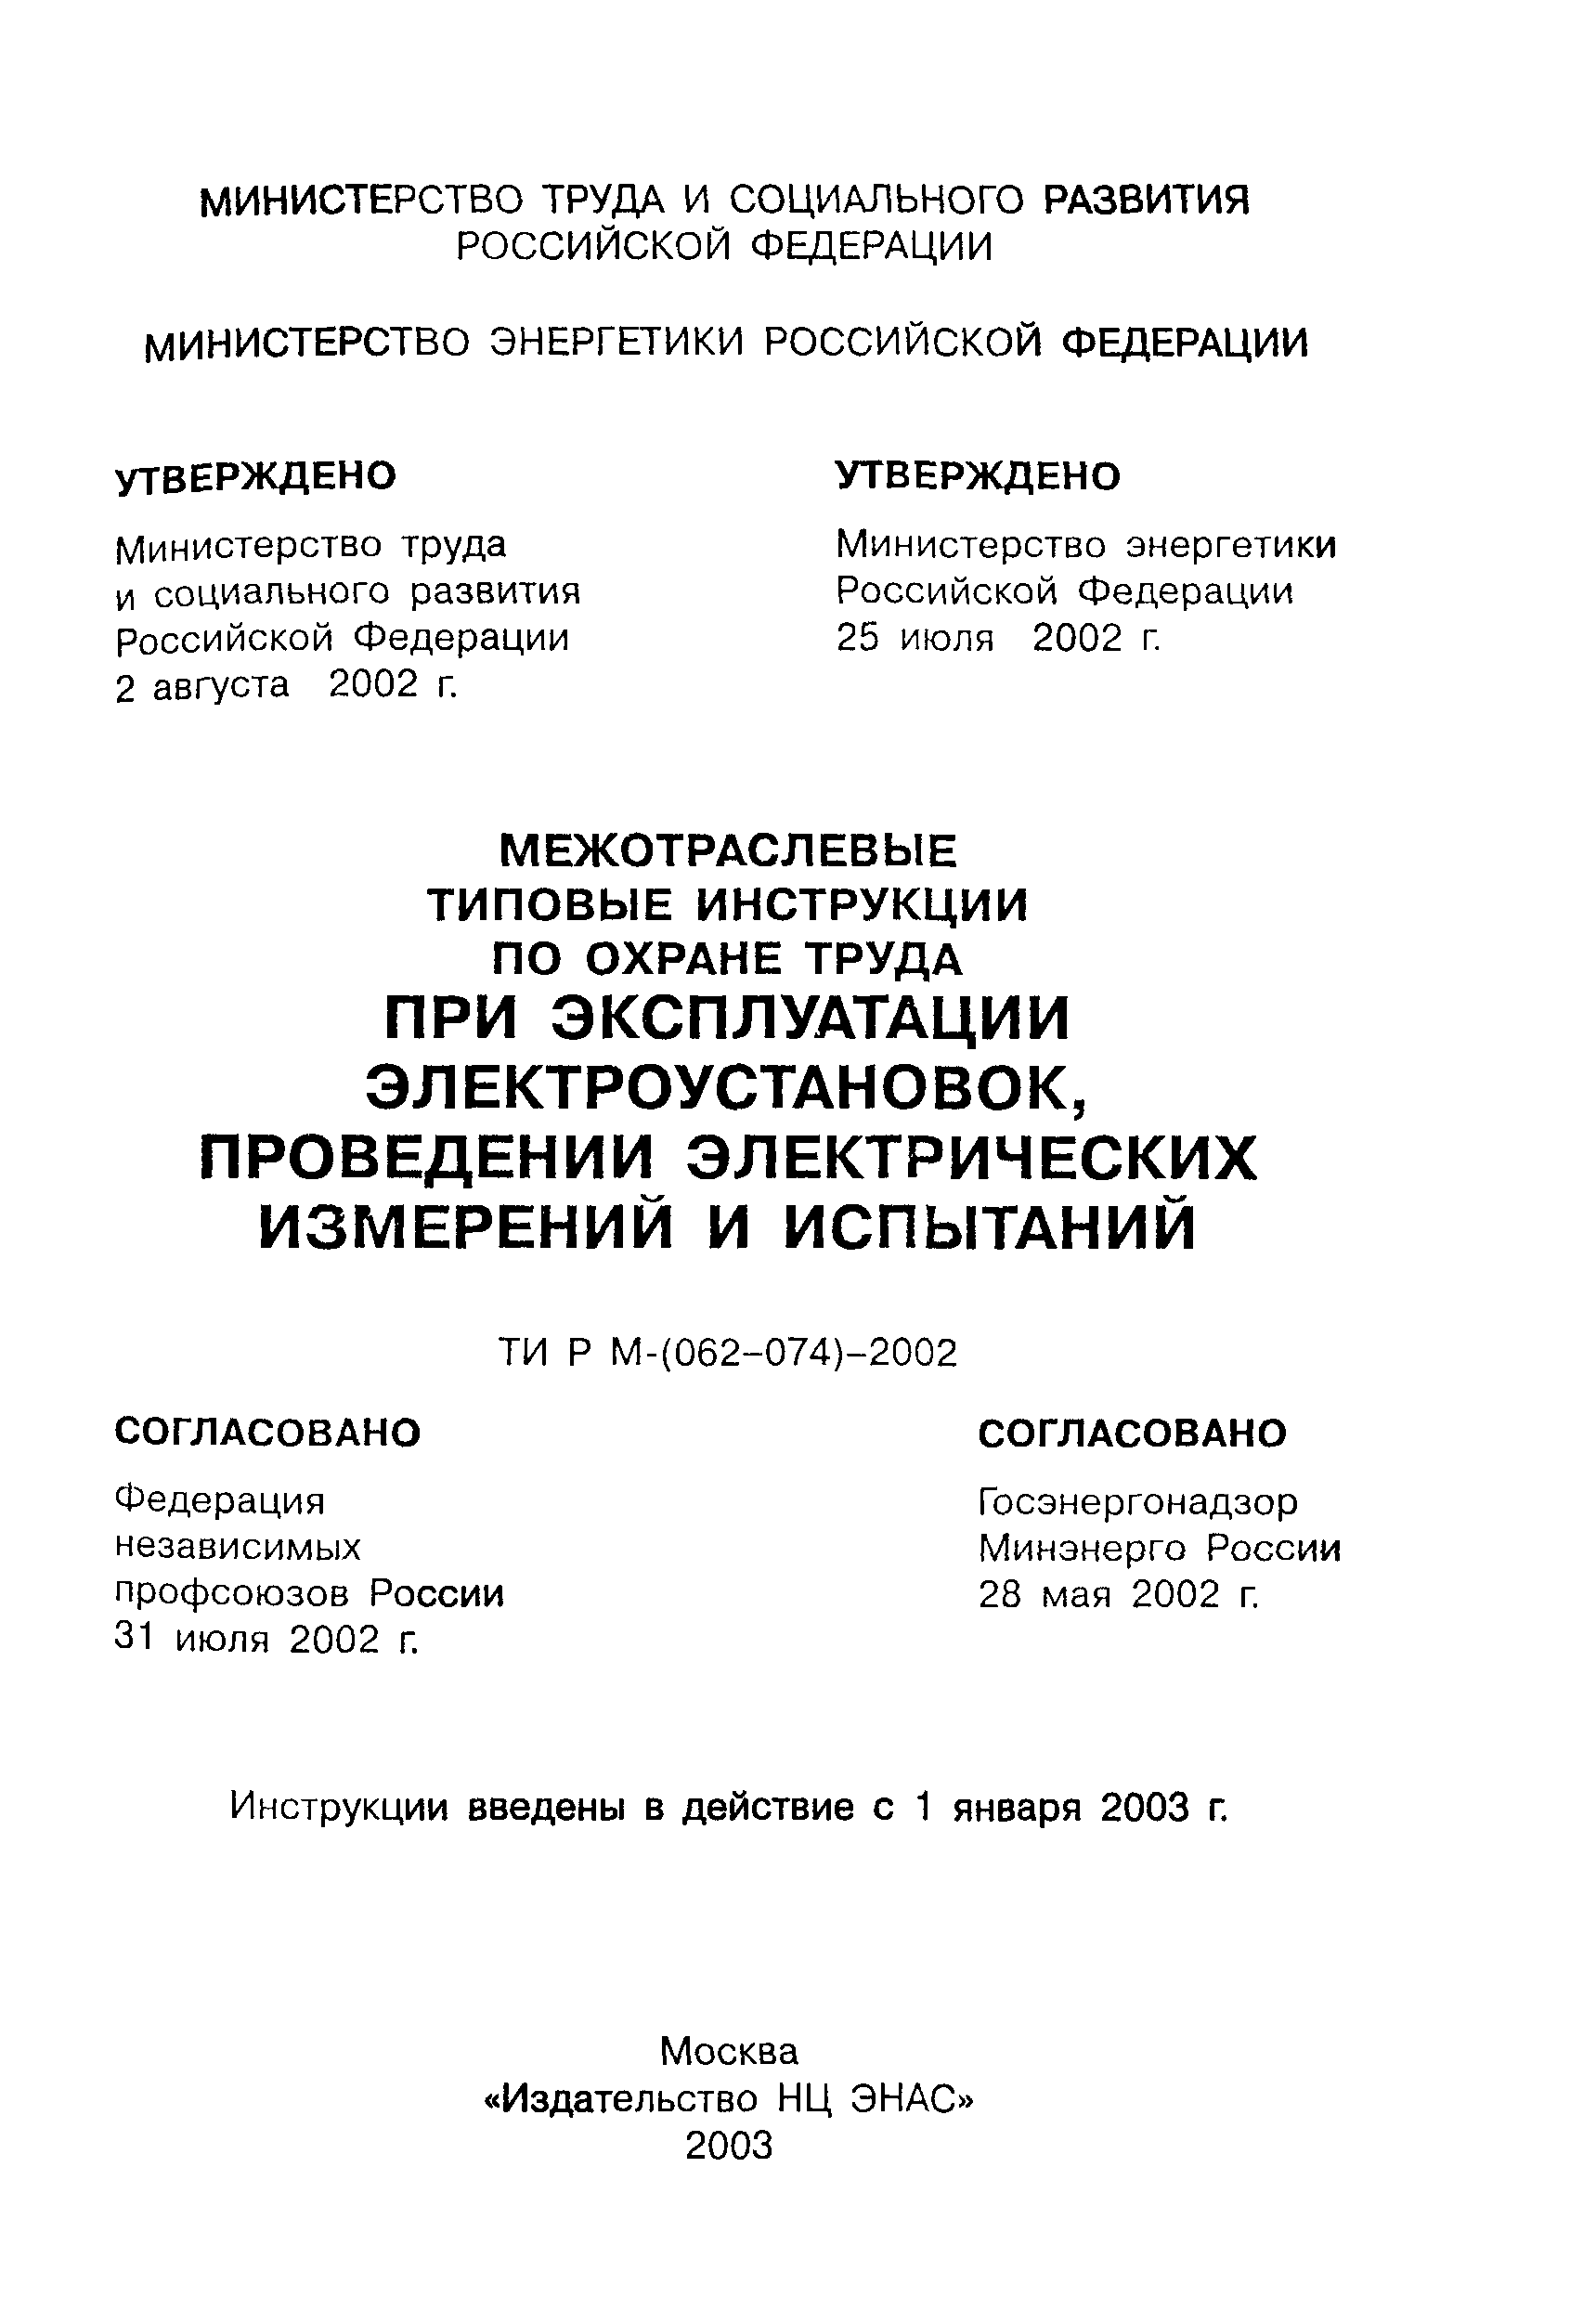 ТИ Р М-072-2002